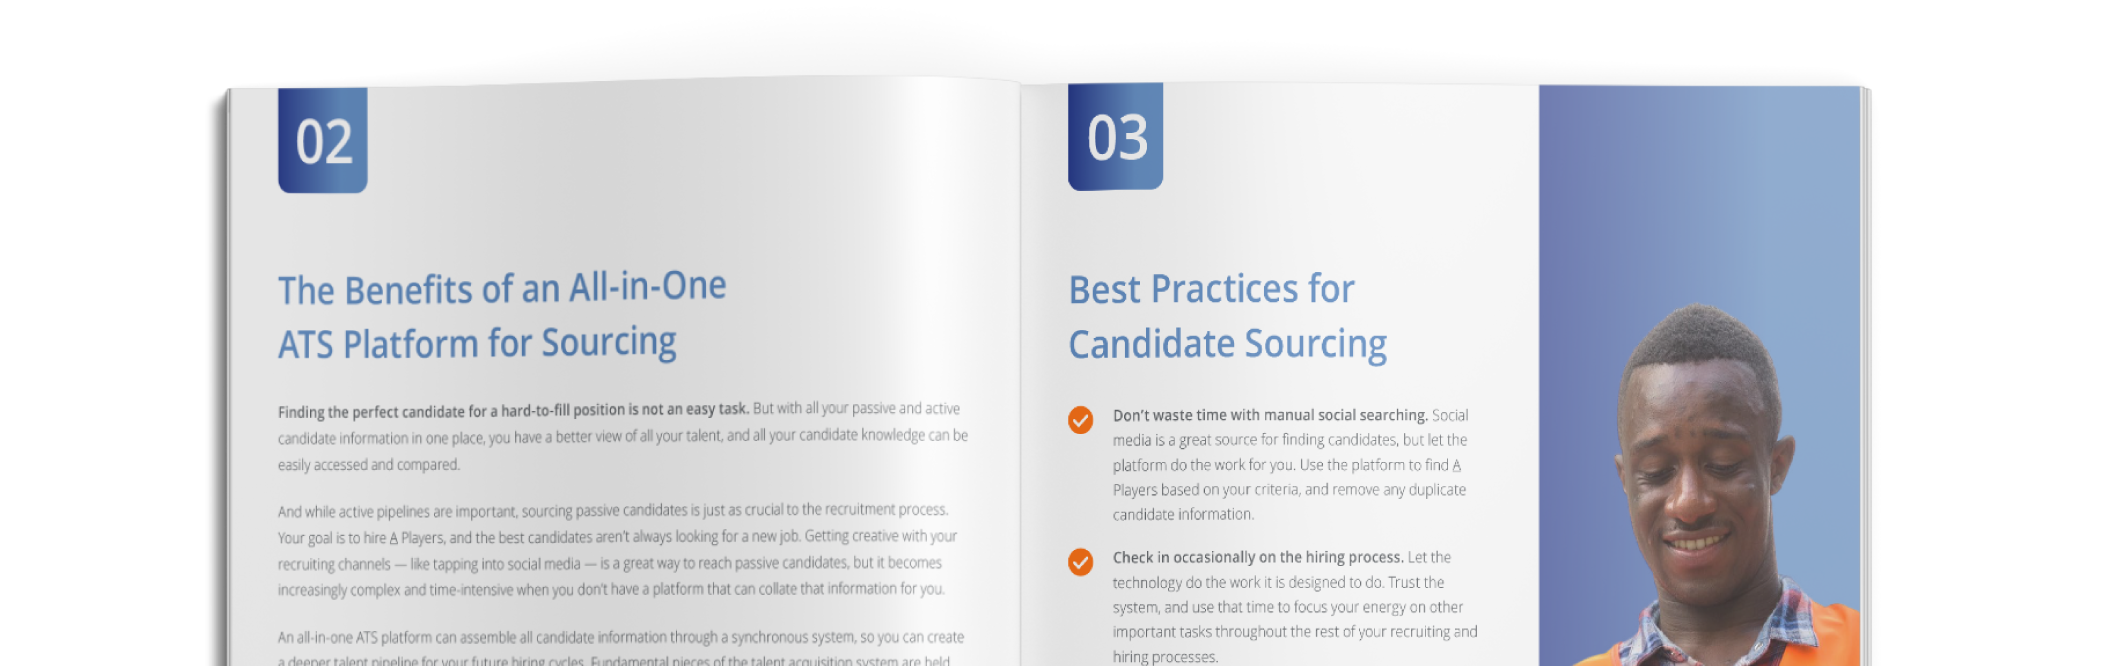 Quick-Guide-Sourcing-Candidates-CutoffMockup